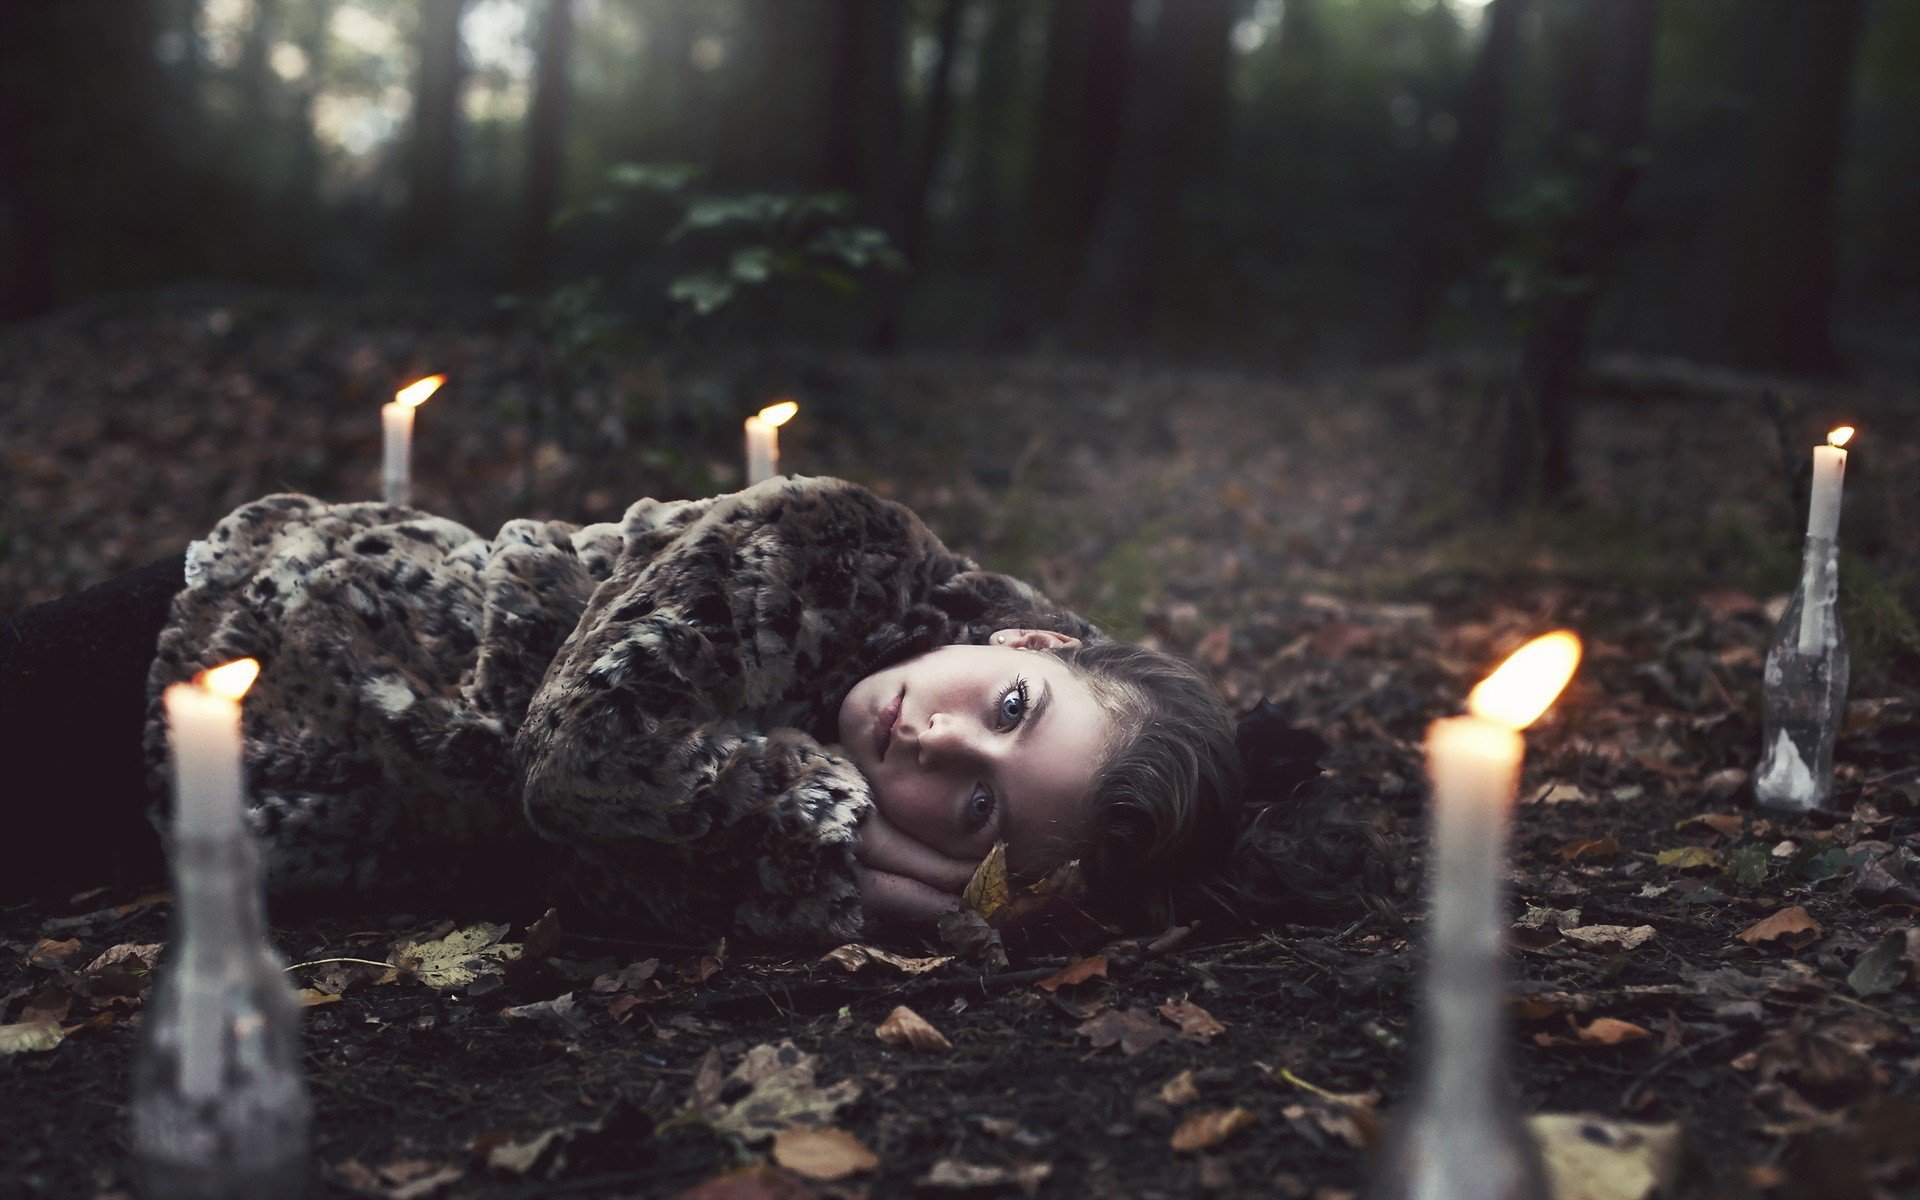 9.Girls_Girl_lying_among_candles_in_the_forest_101515_.jpg